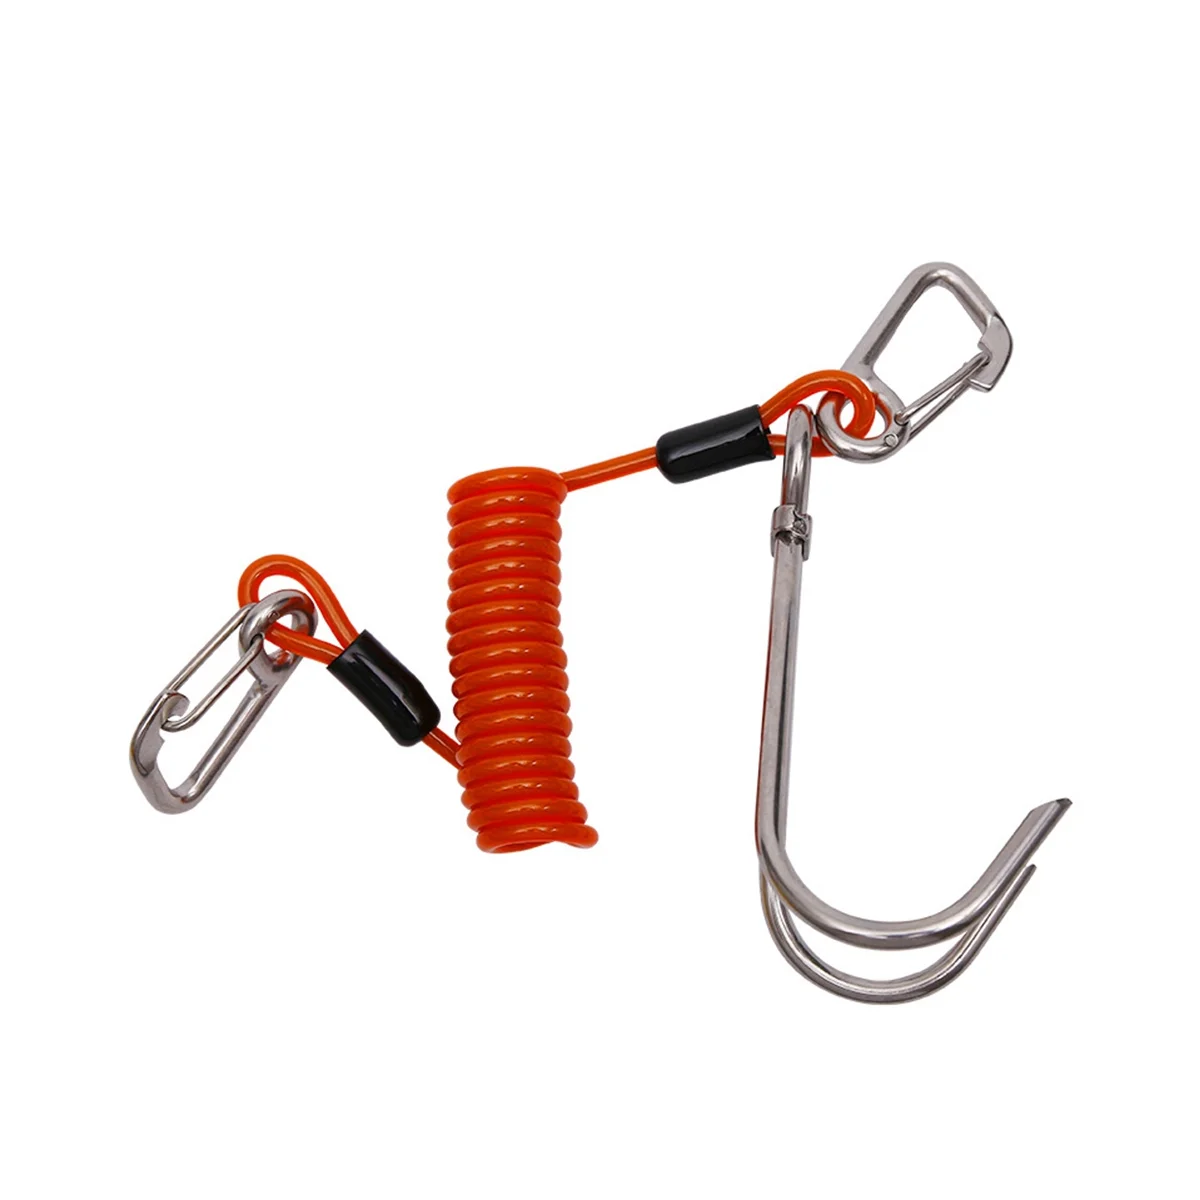 

Double Head Dive Reef Rafting Hook Stainless Steel Reef Hook Spiral Coil Spring Cord Dive Safety Accessory - Orange